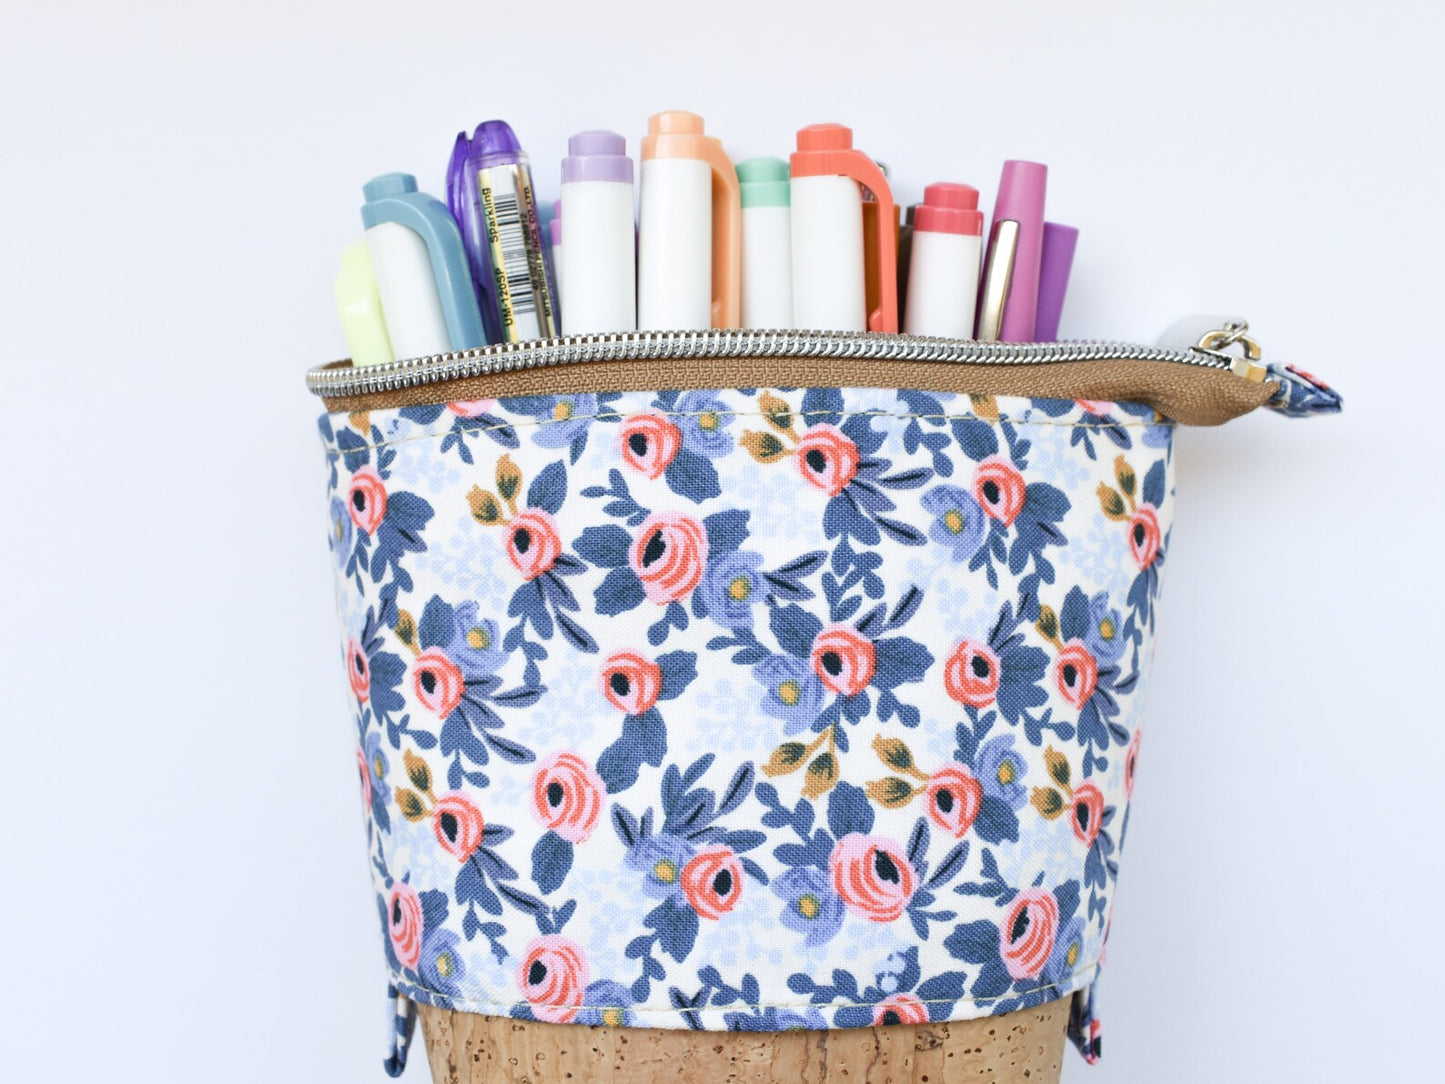 Rosa in Blue Slide pouch - Rifle paper co